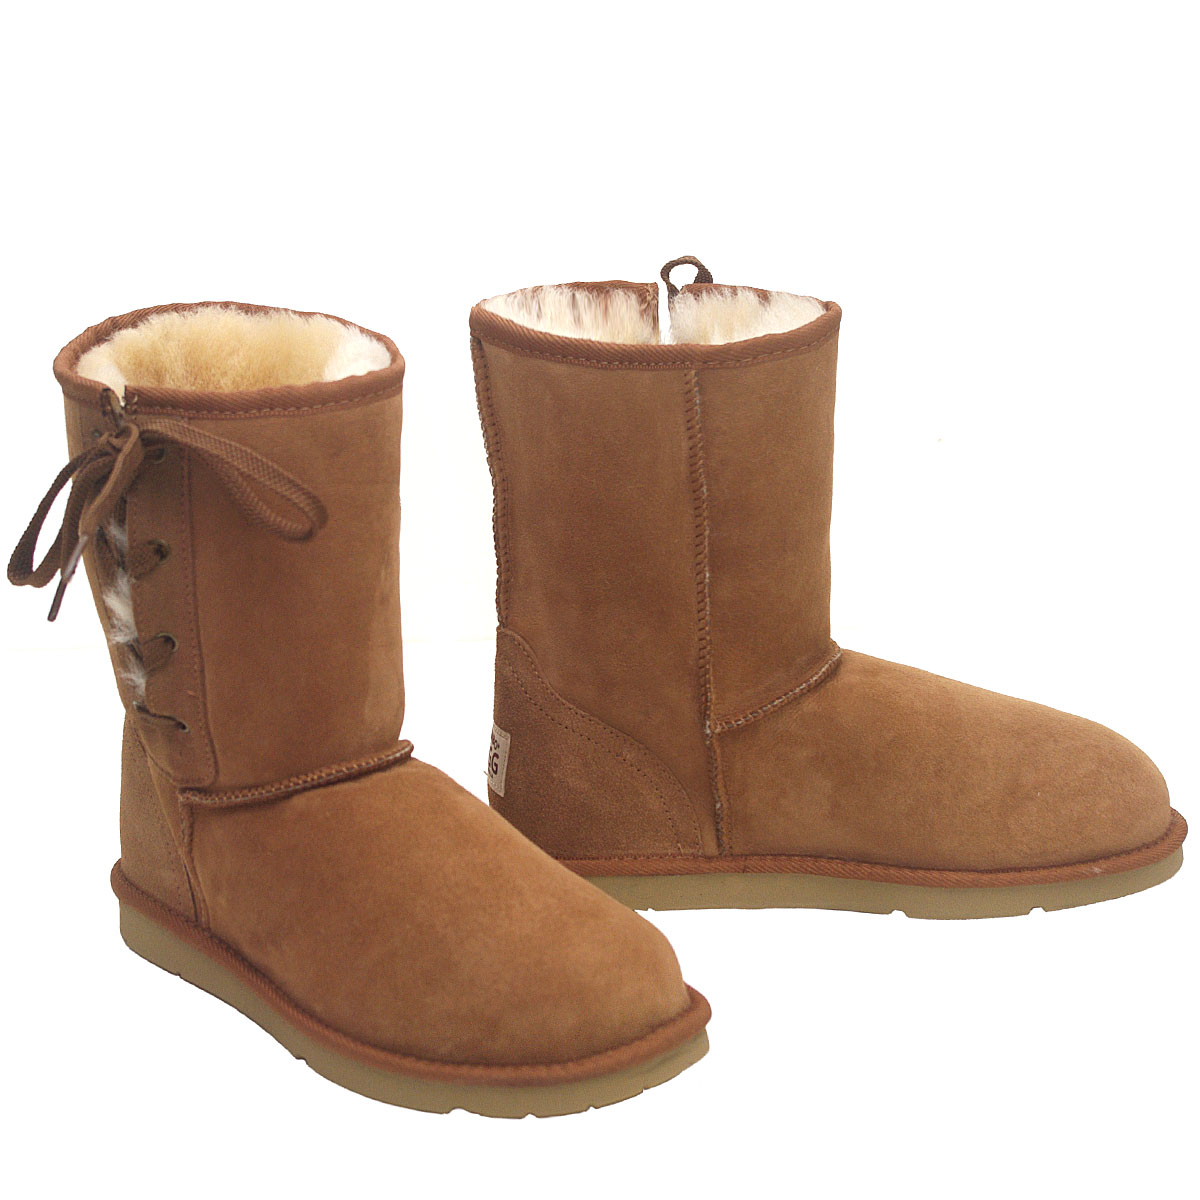 Lace-Up Ugg Boots Chestnut